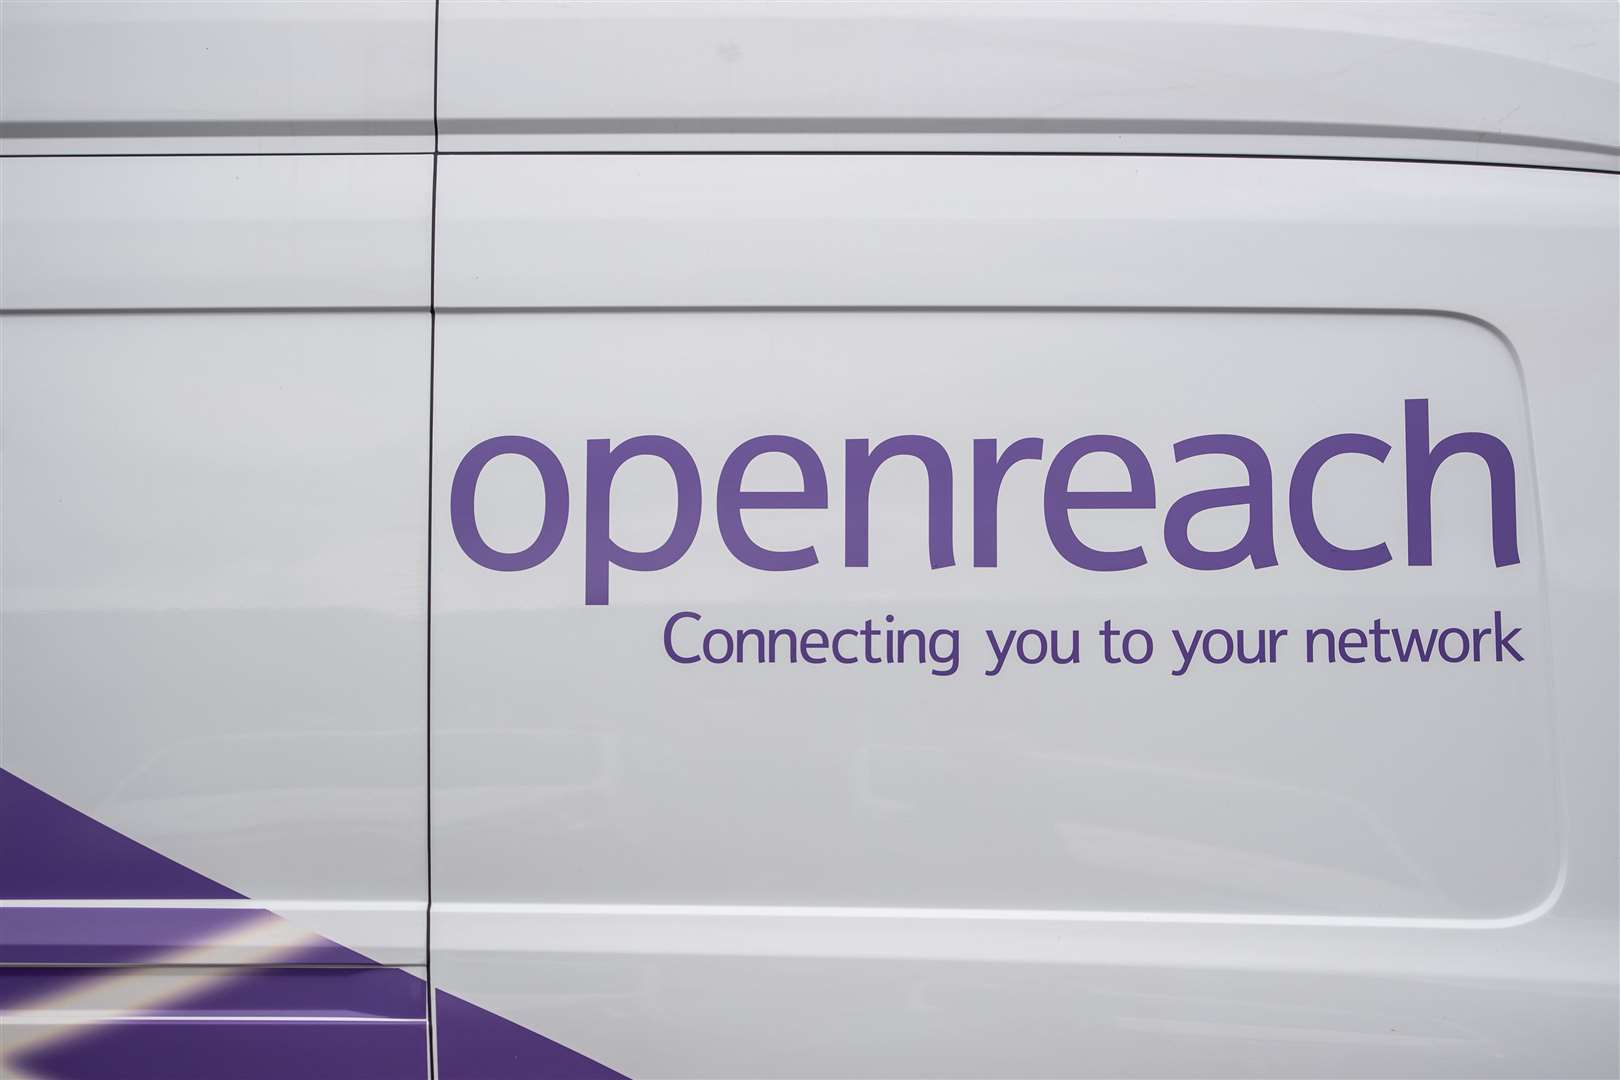 Openreach, owned by BT Group, has been rolling out full fibre broadband across the country (Joe Giddens/PA)